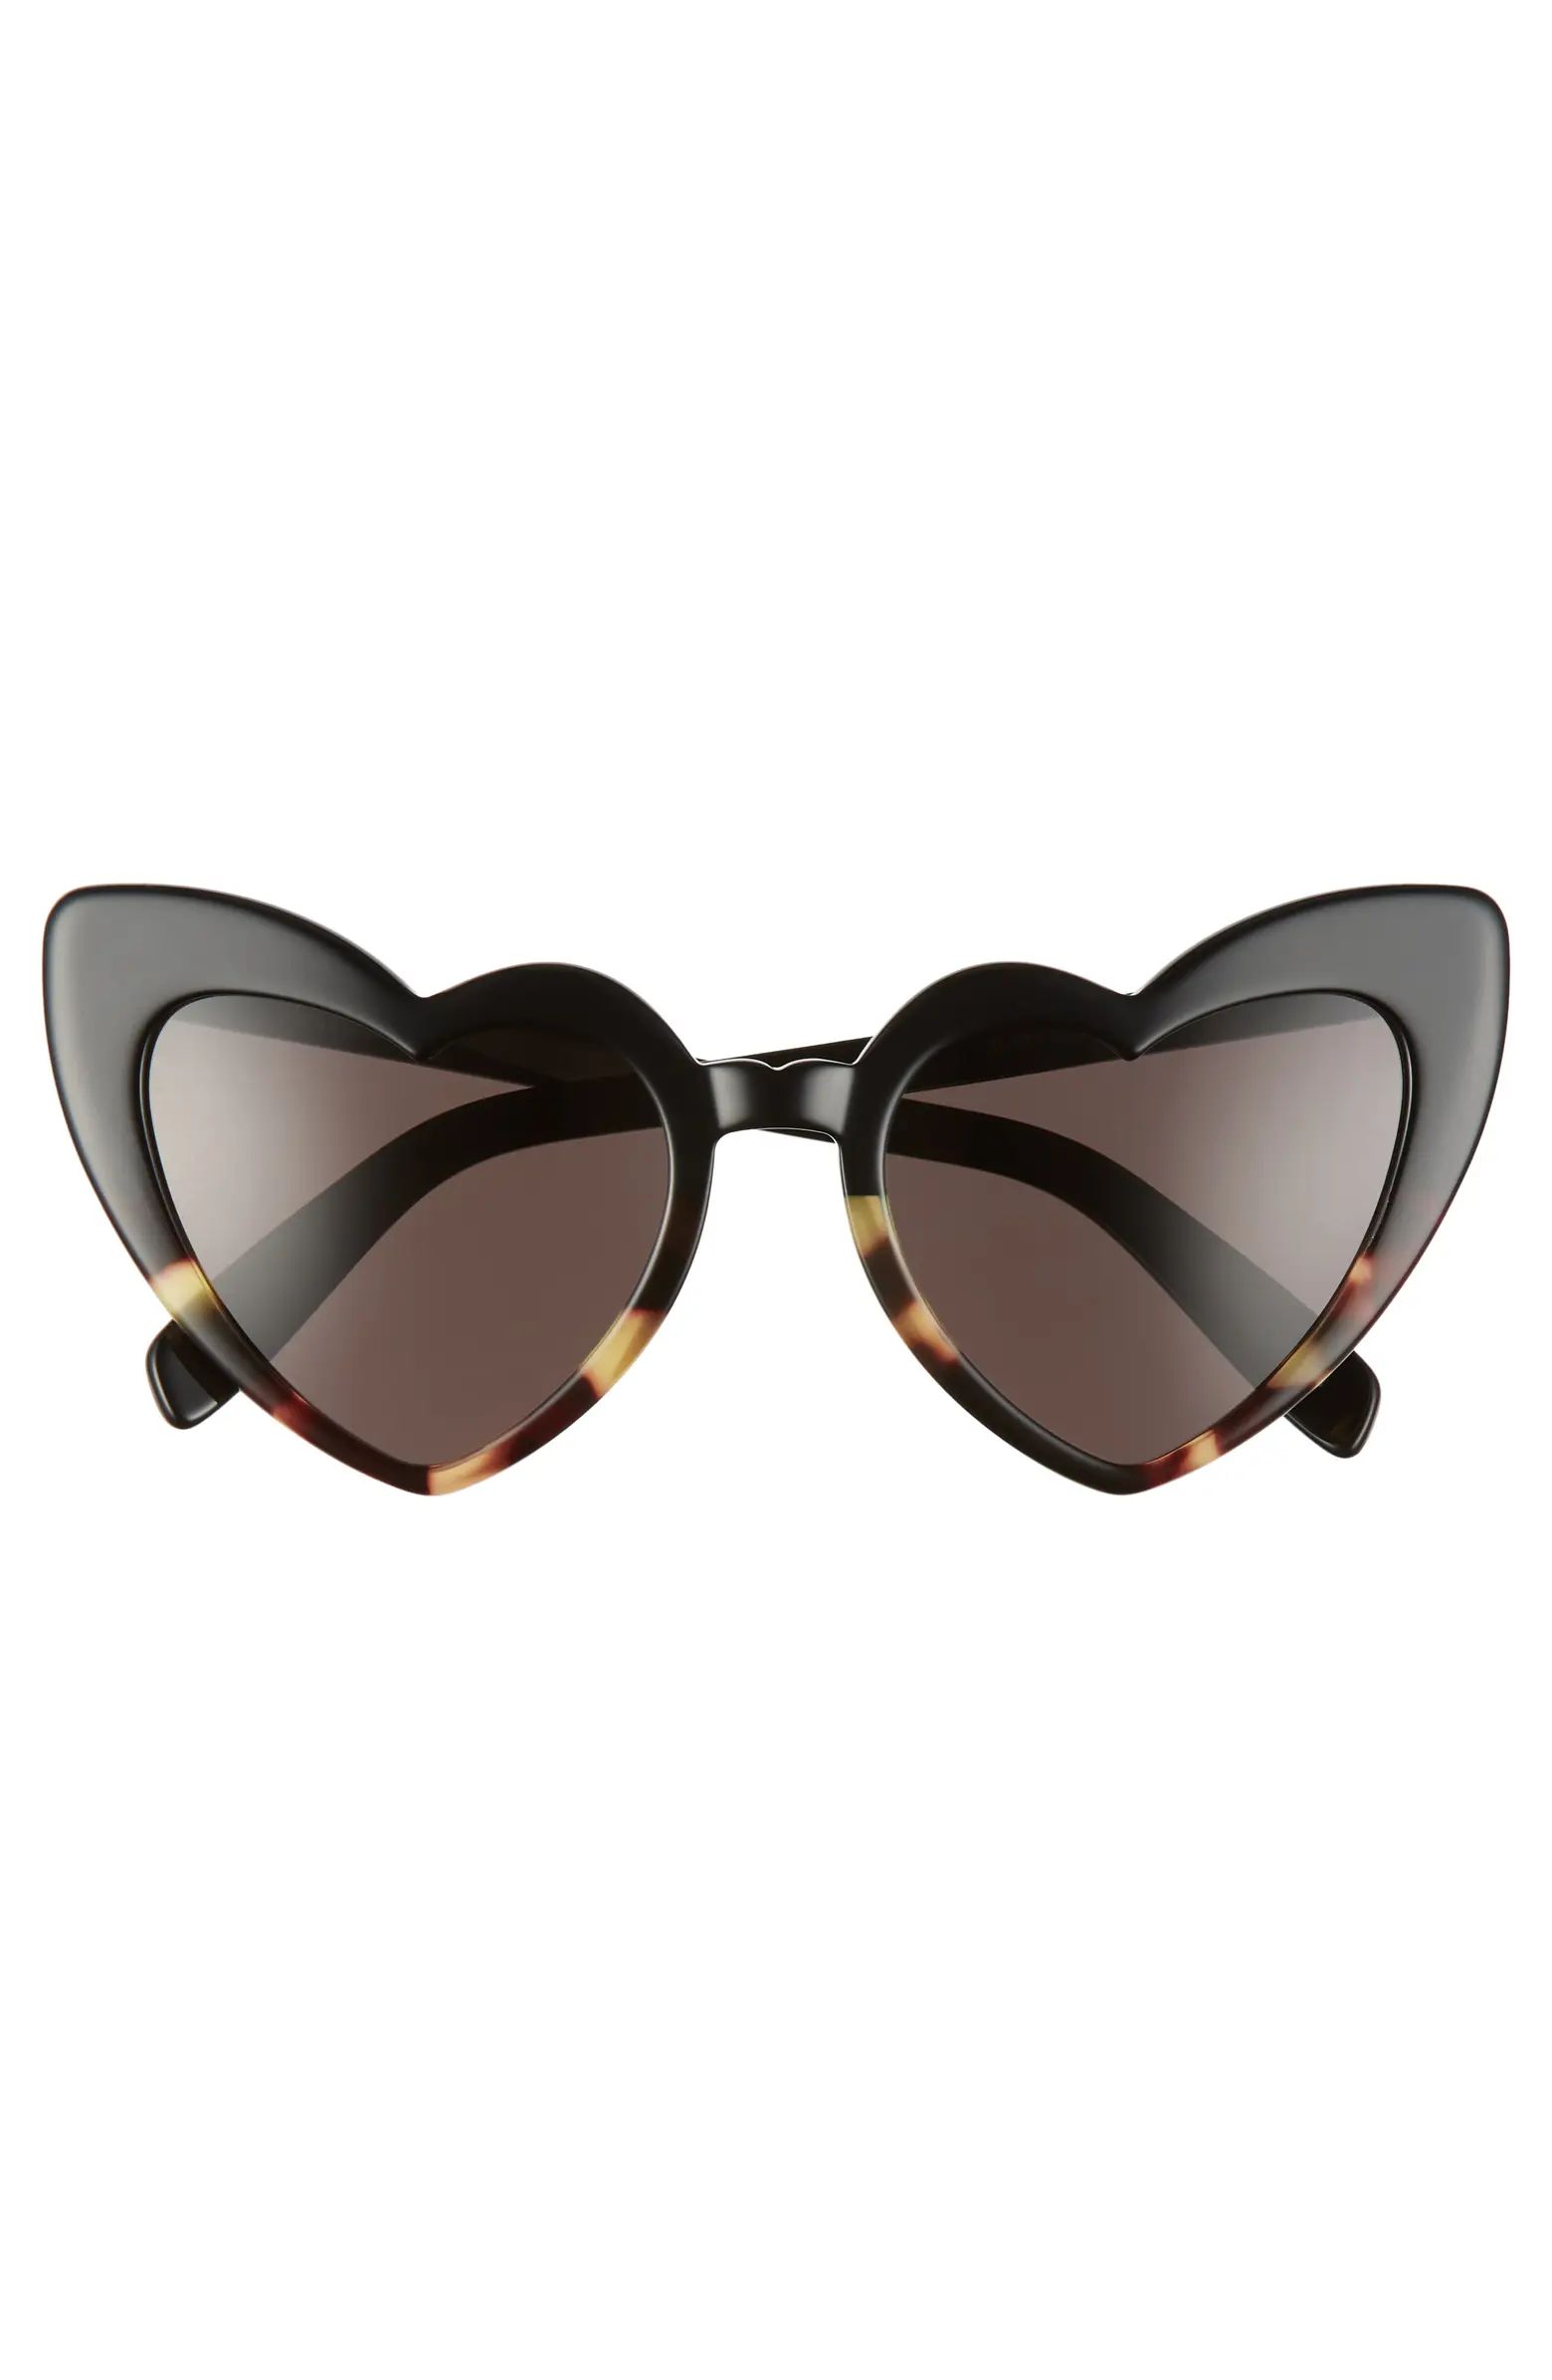 Loulou 54mm Heart Sunglasses | Nordstrom